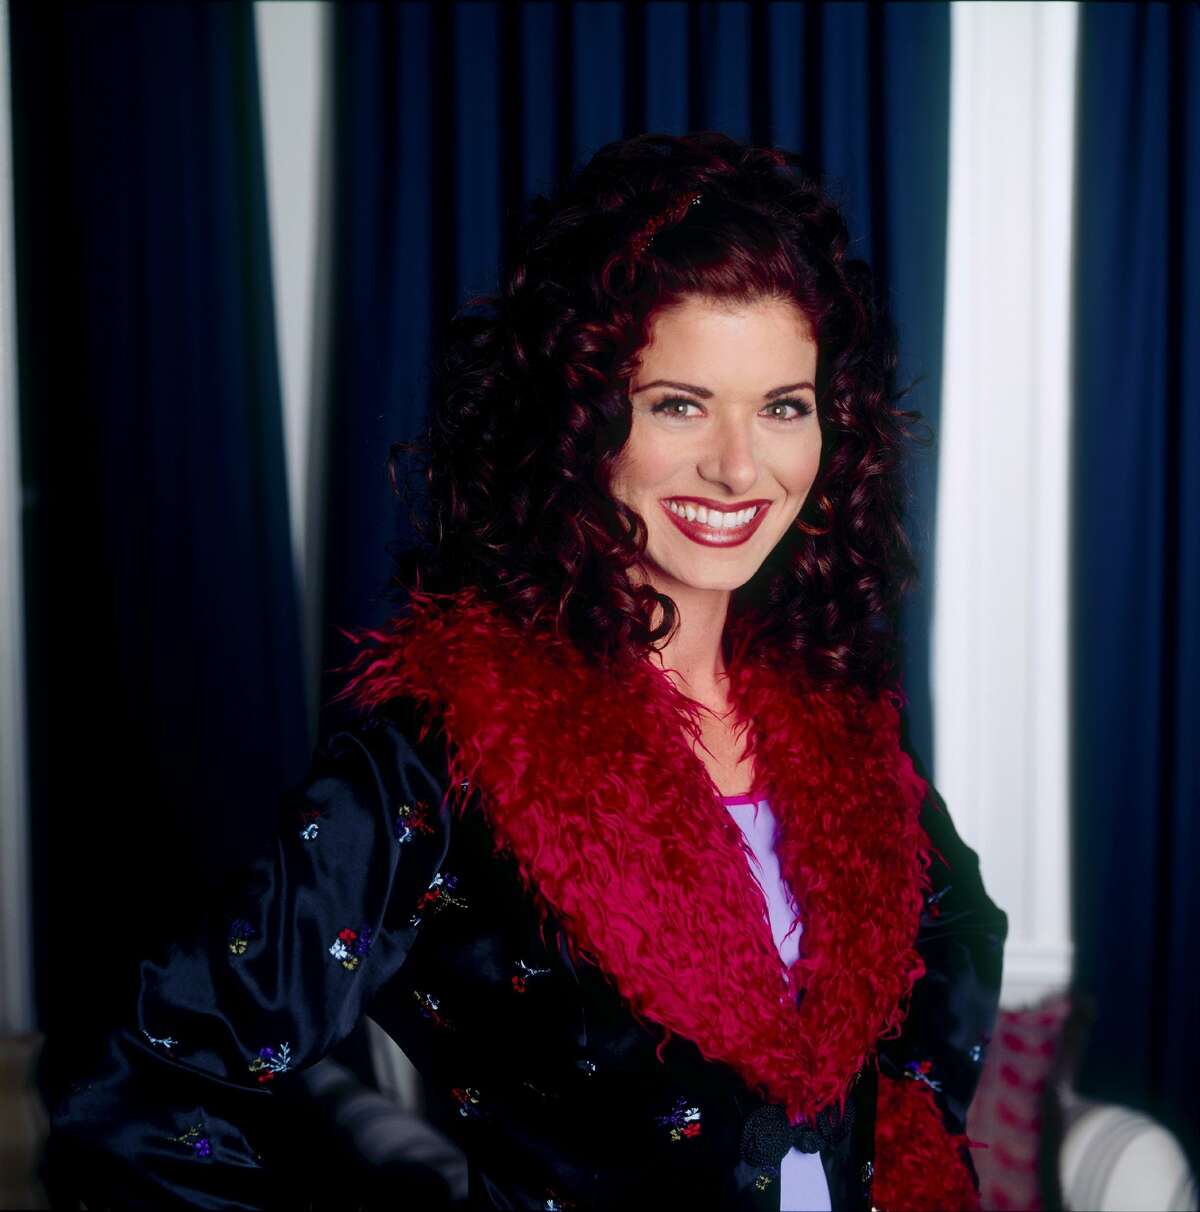 Debra Messing as Grace Adler in 1998 before the premiere of "Will & Grace."